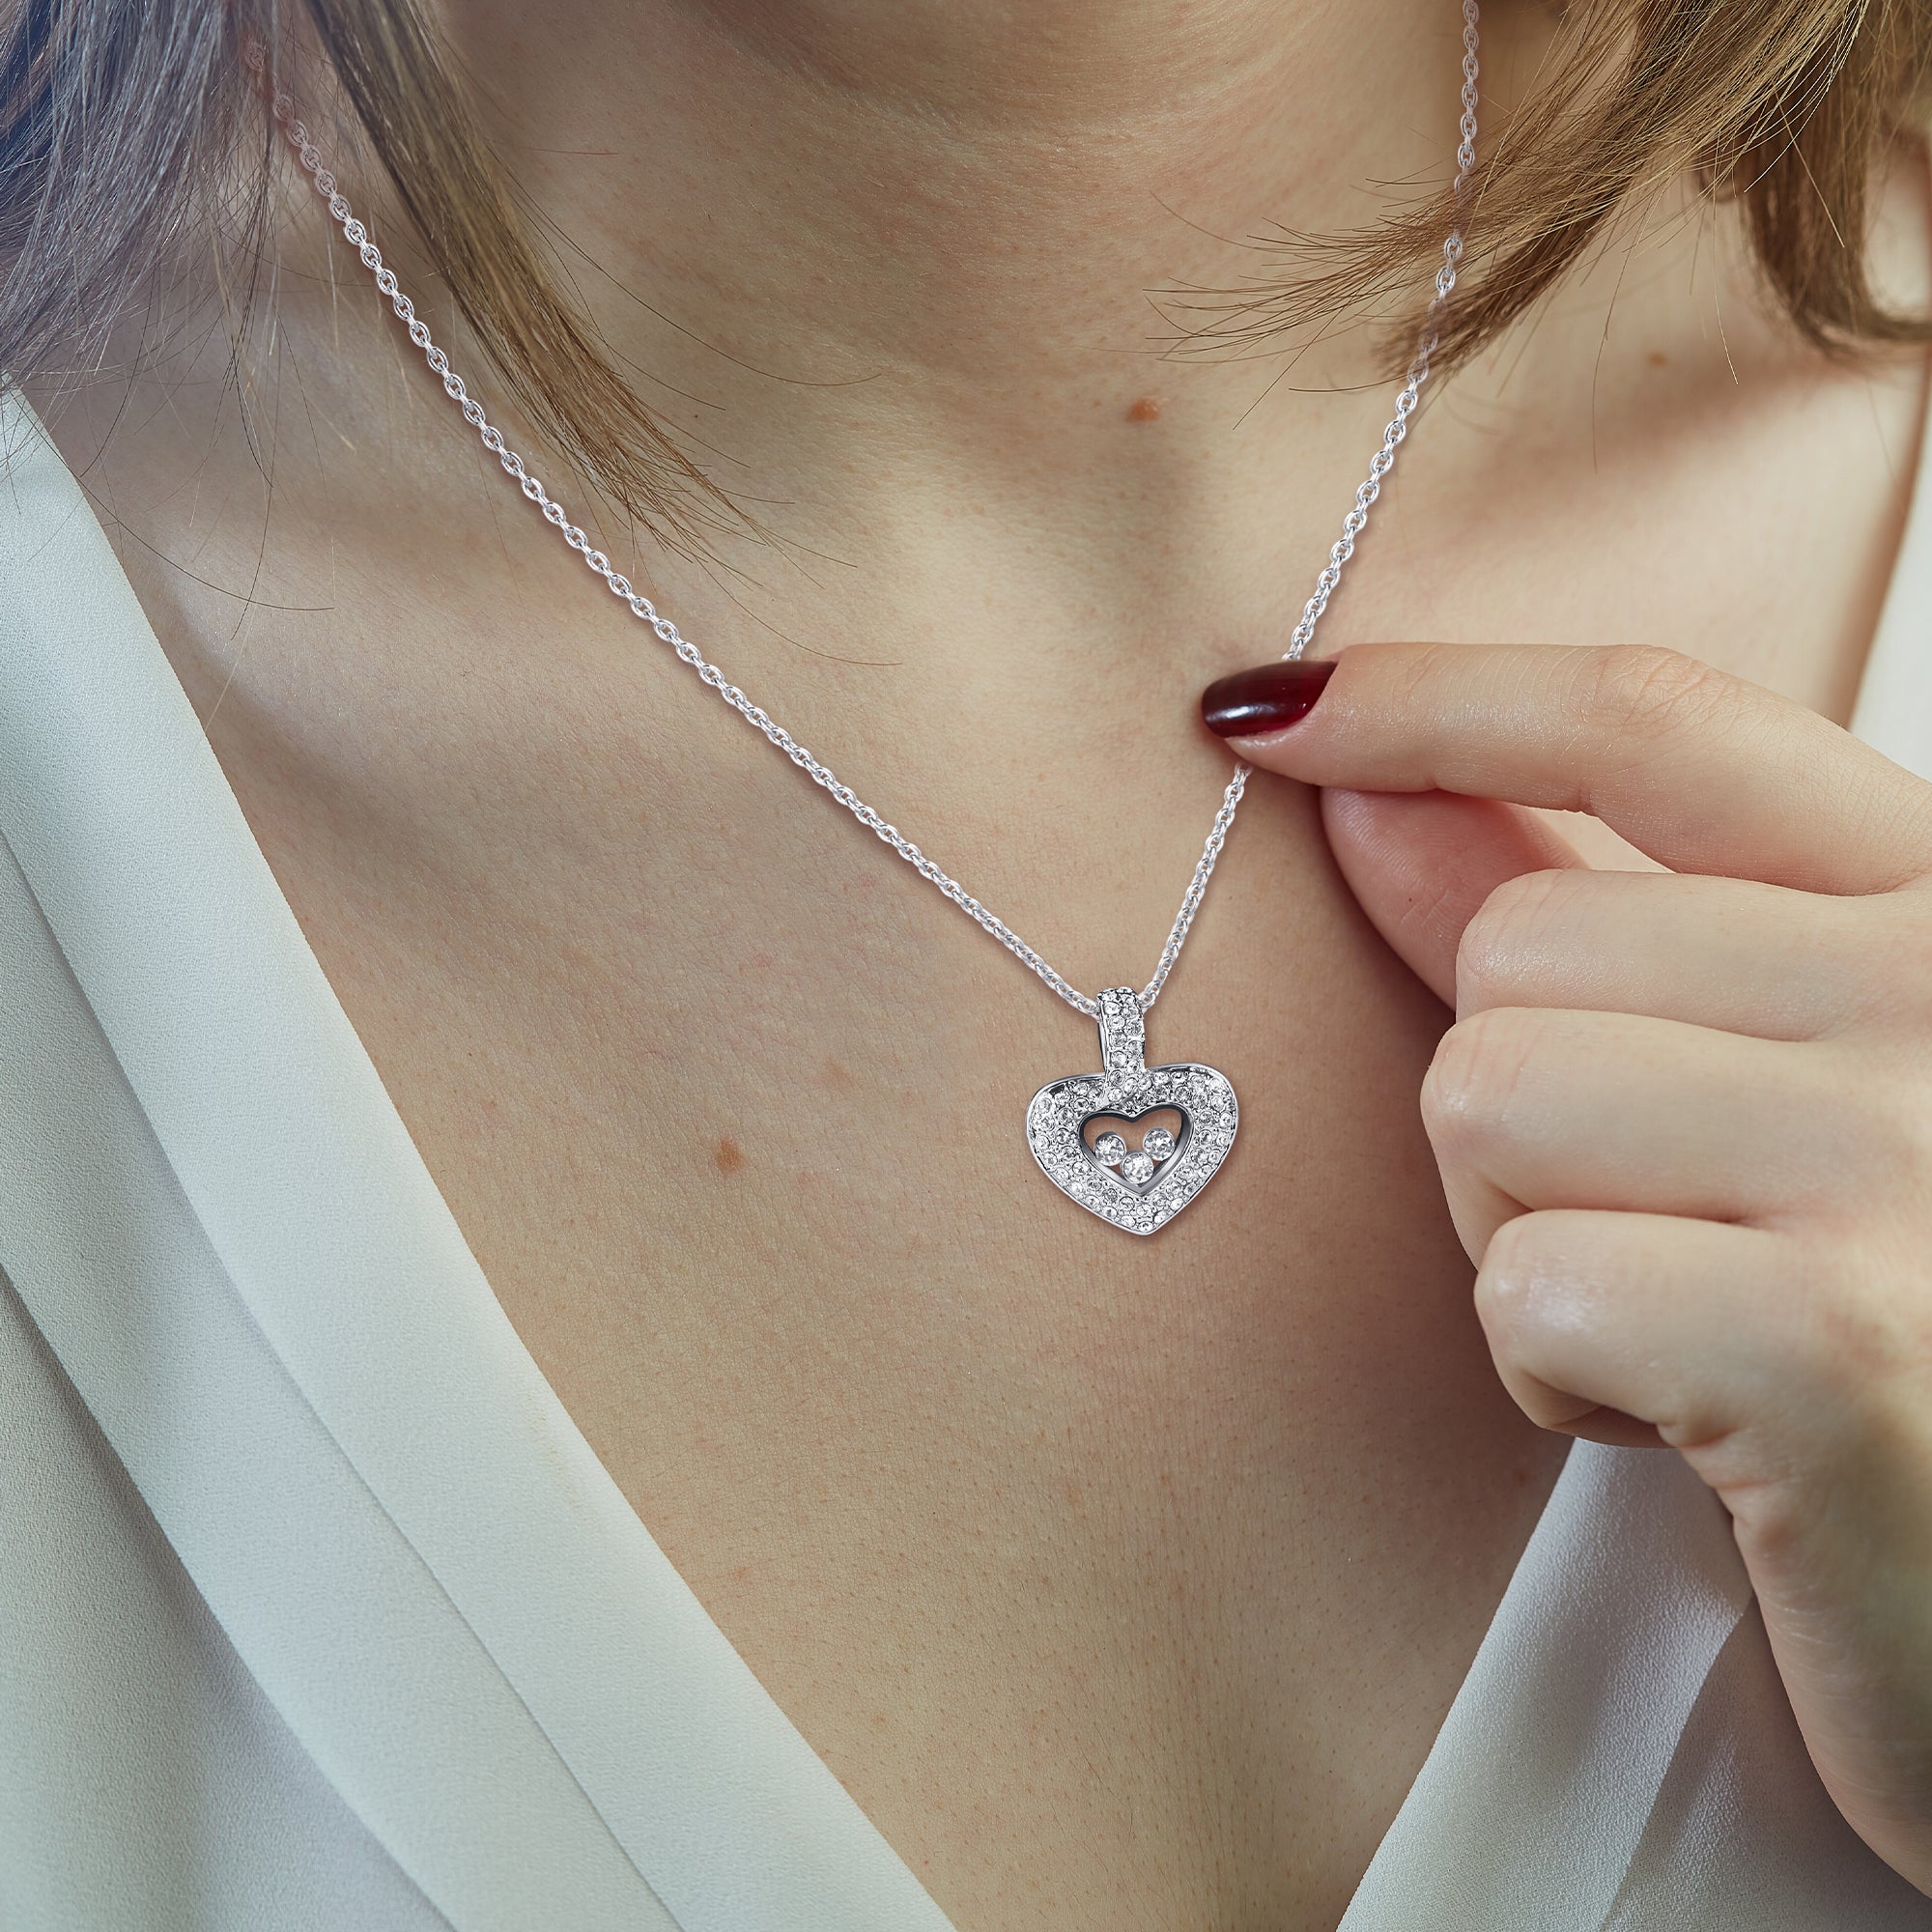 To My Dear Daughter-in-Law - Love, Mother-in-Law - Tryndi Floating Heart Necklace